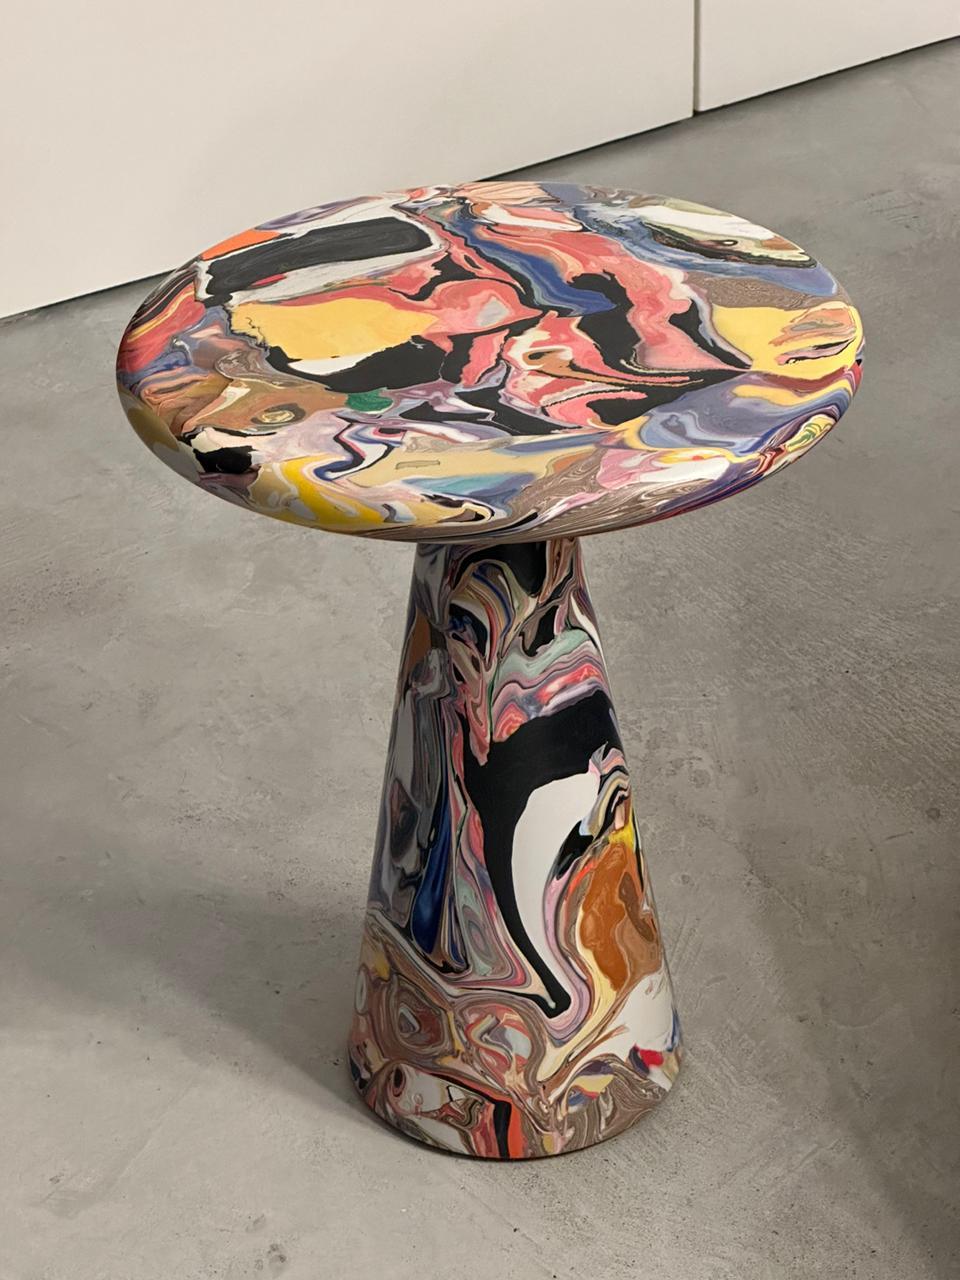 The Meltingpot table designed by Kooij plays a keystone role in the circular design practice at Kooij. Discarded recycled plastic prototypes, production faults, and color tests form the basis of the conglomerate Meltingpot.